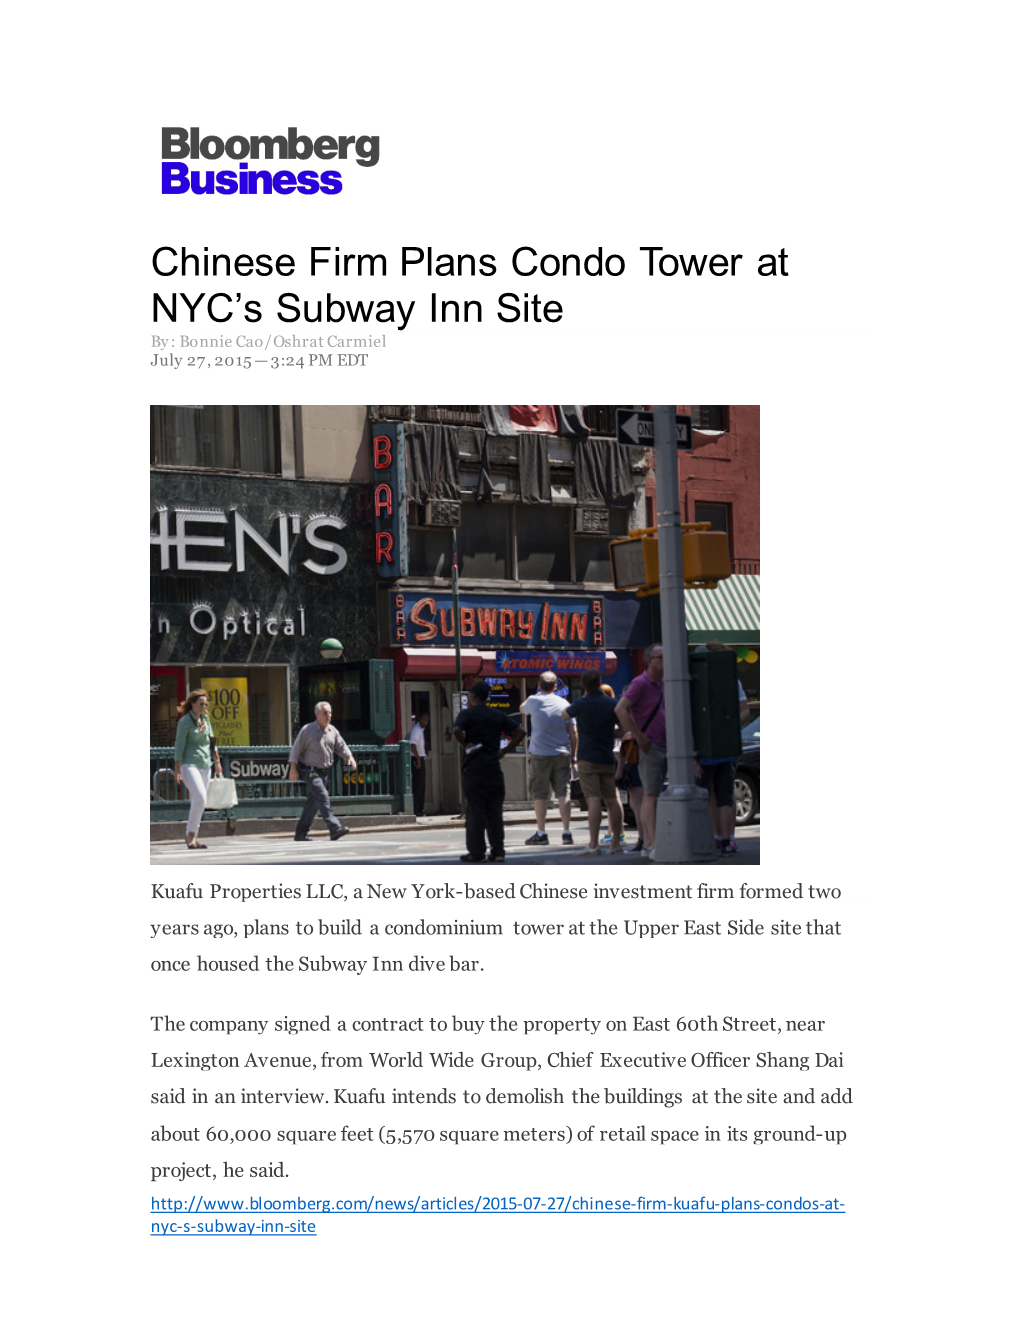 Chinese Firm Plans Condo Tower at NYC's Subway Inn Site